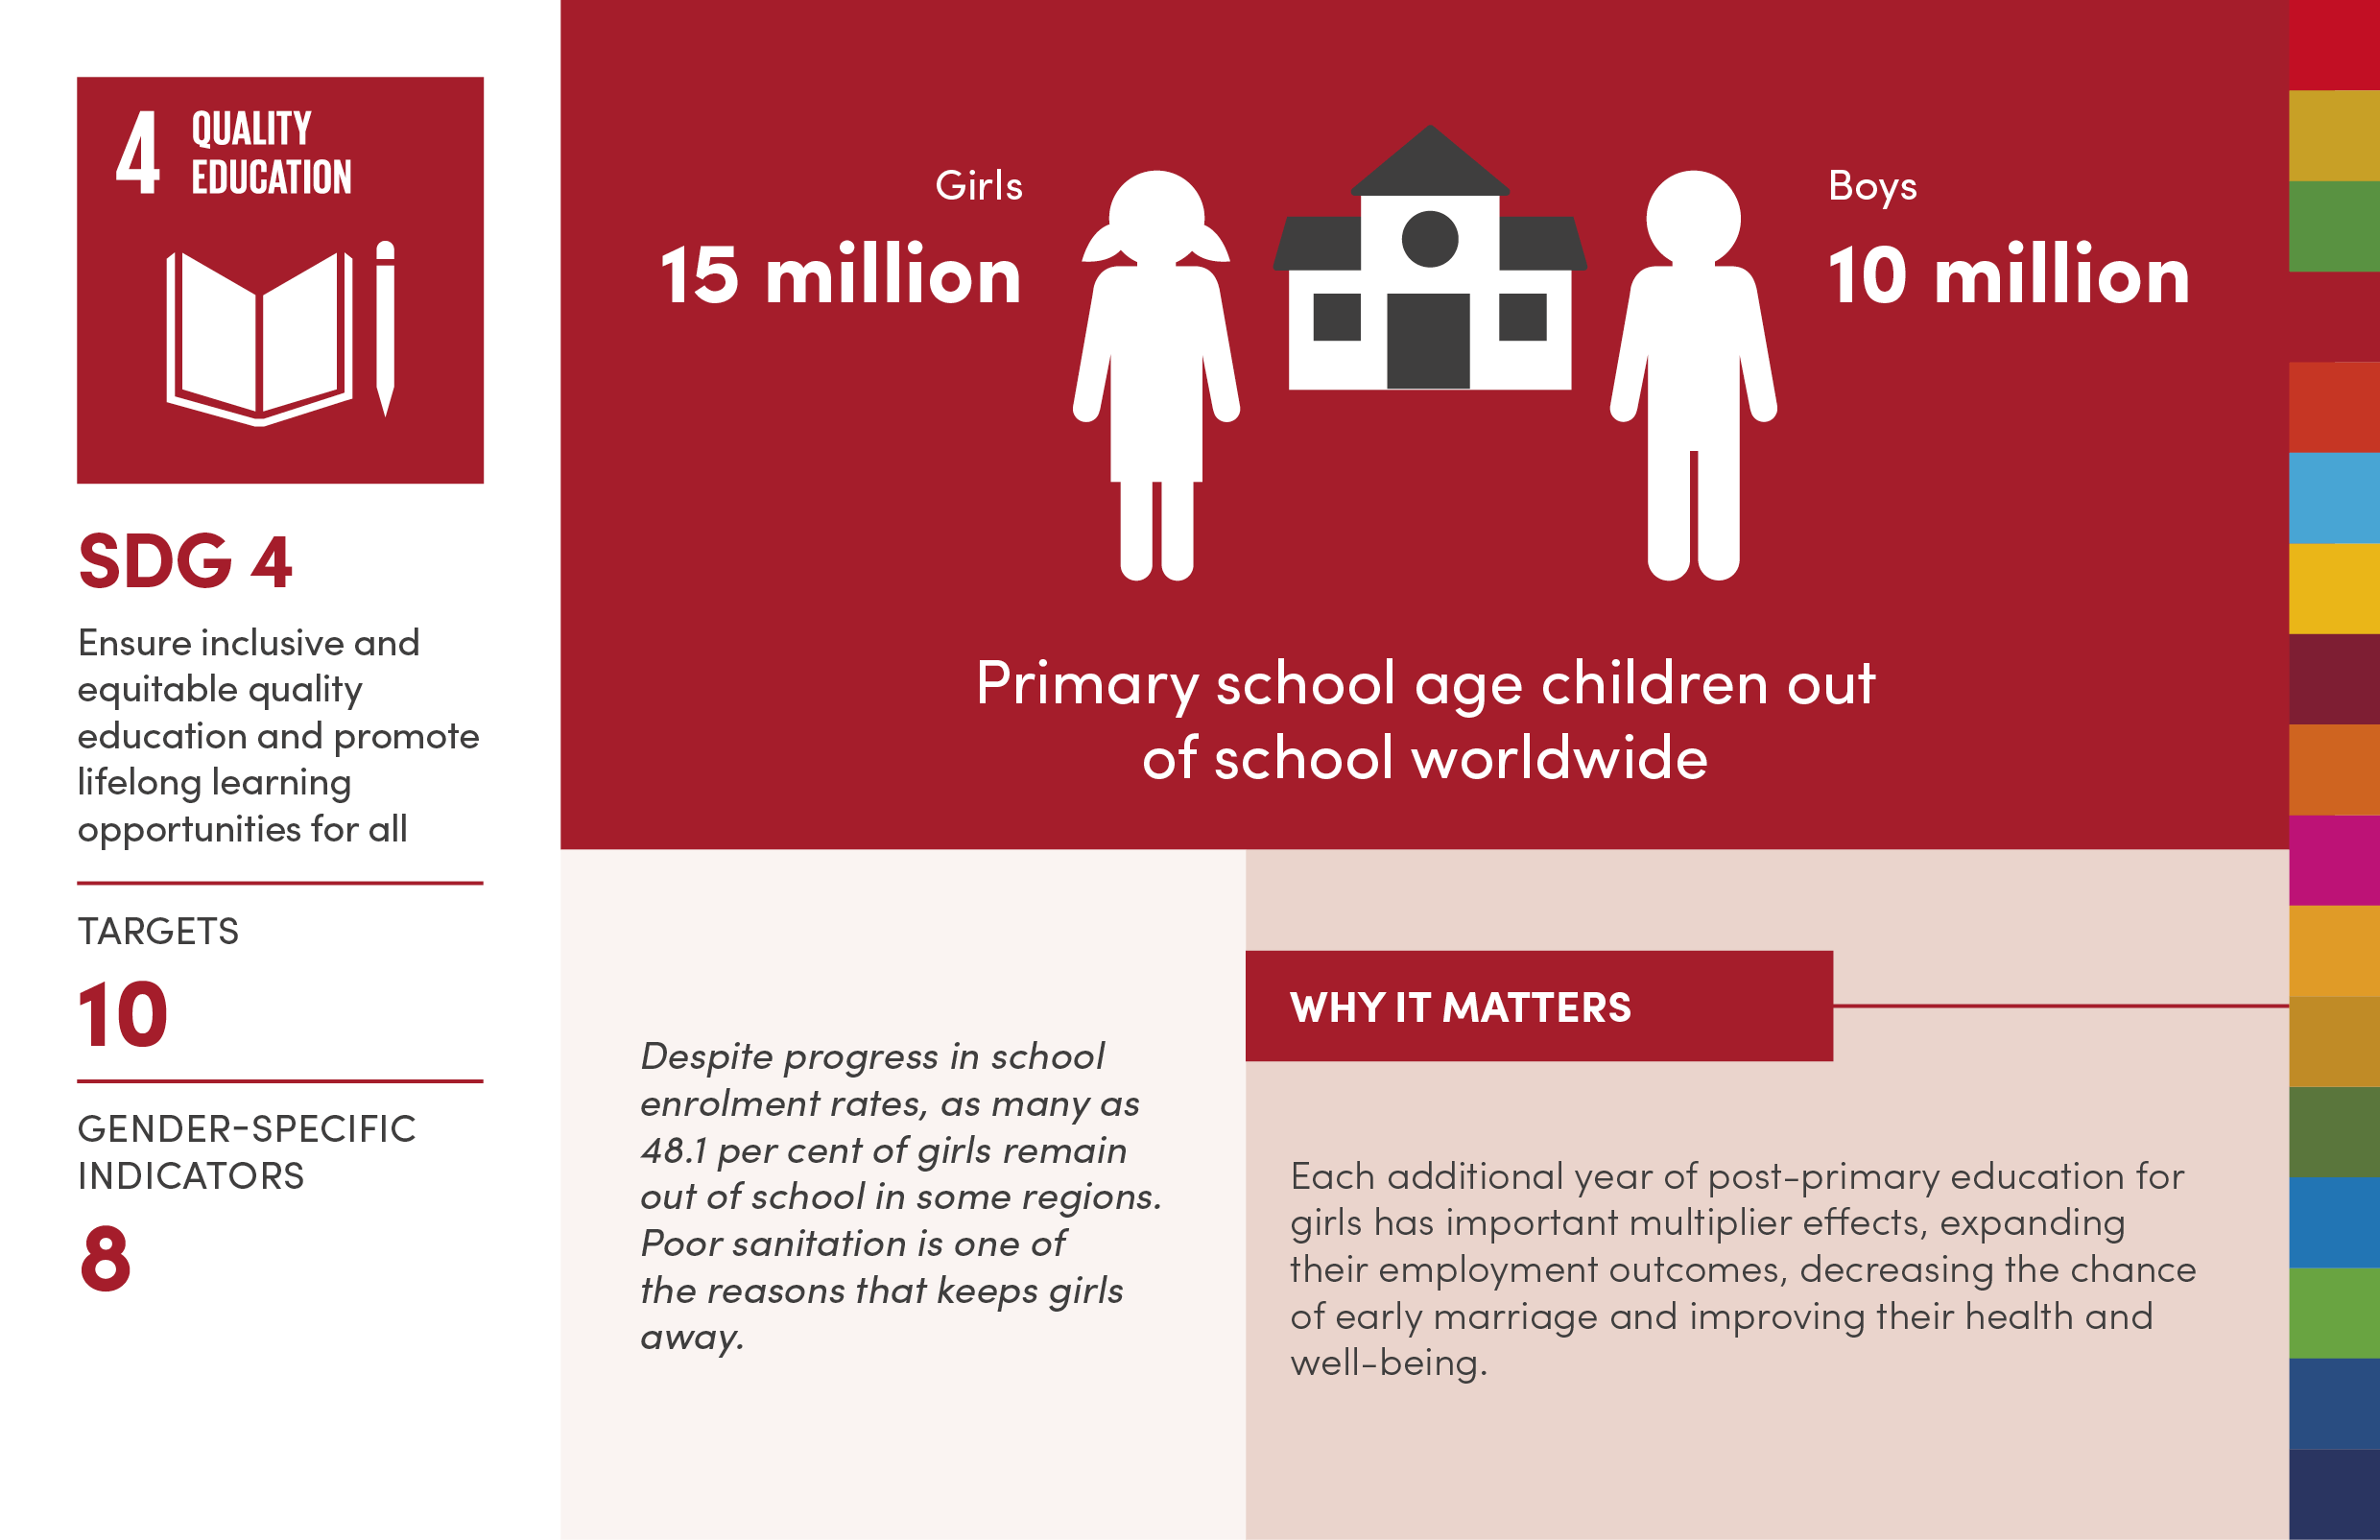 Why gender equality matters to achieving SDG 4